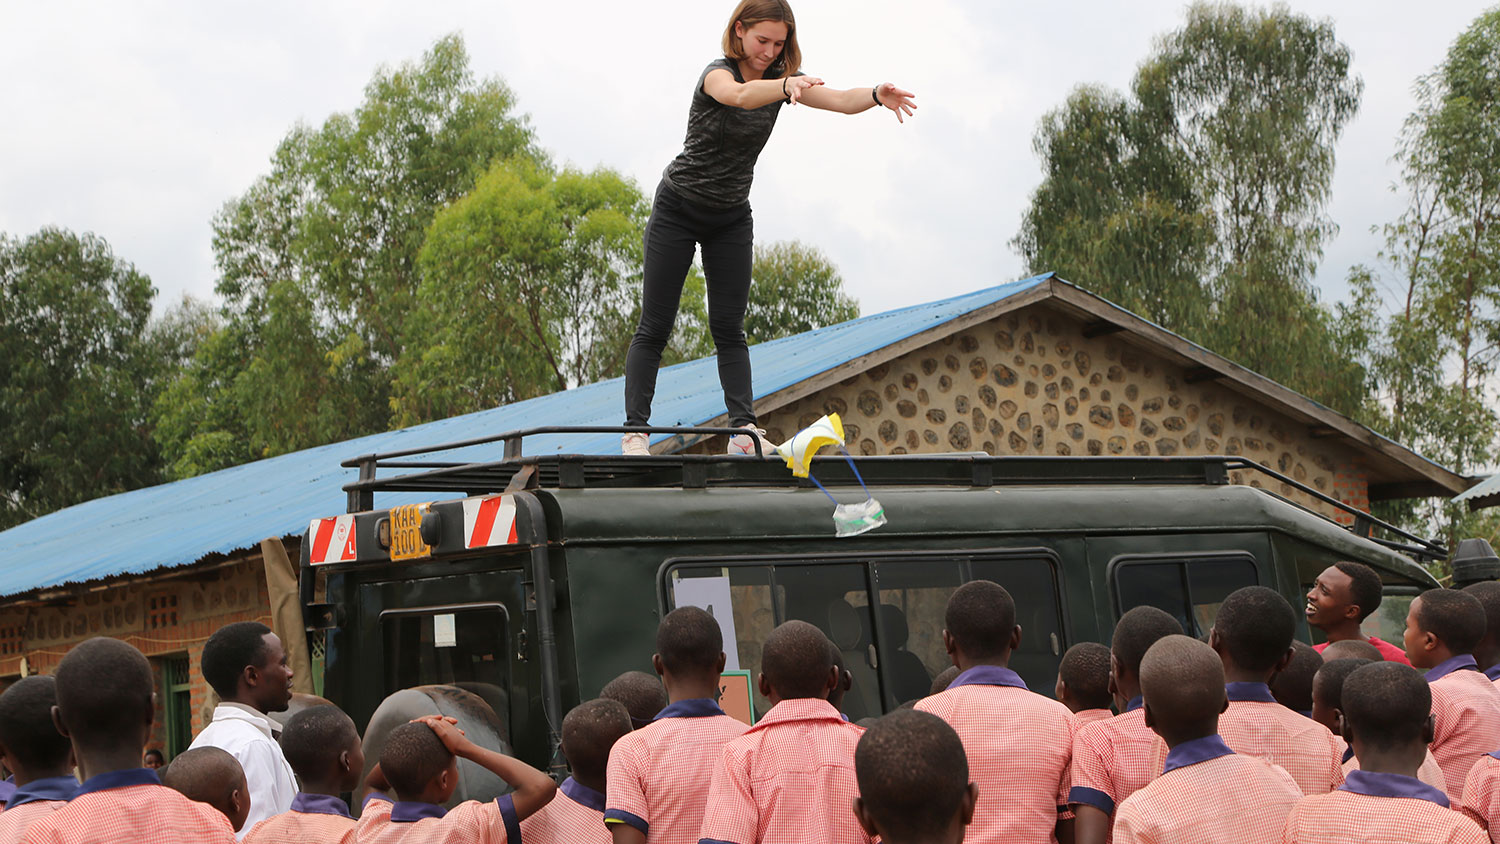 Tyler Brading tests parachutes by dropping them from top of jeep at Nkumba Primary School